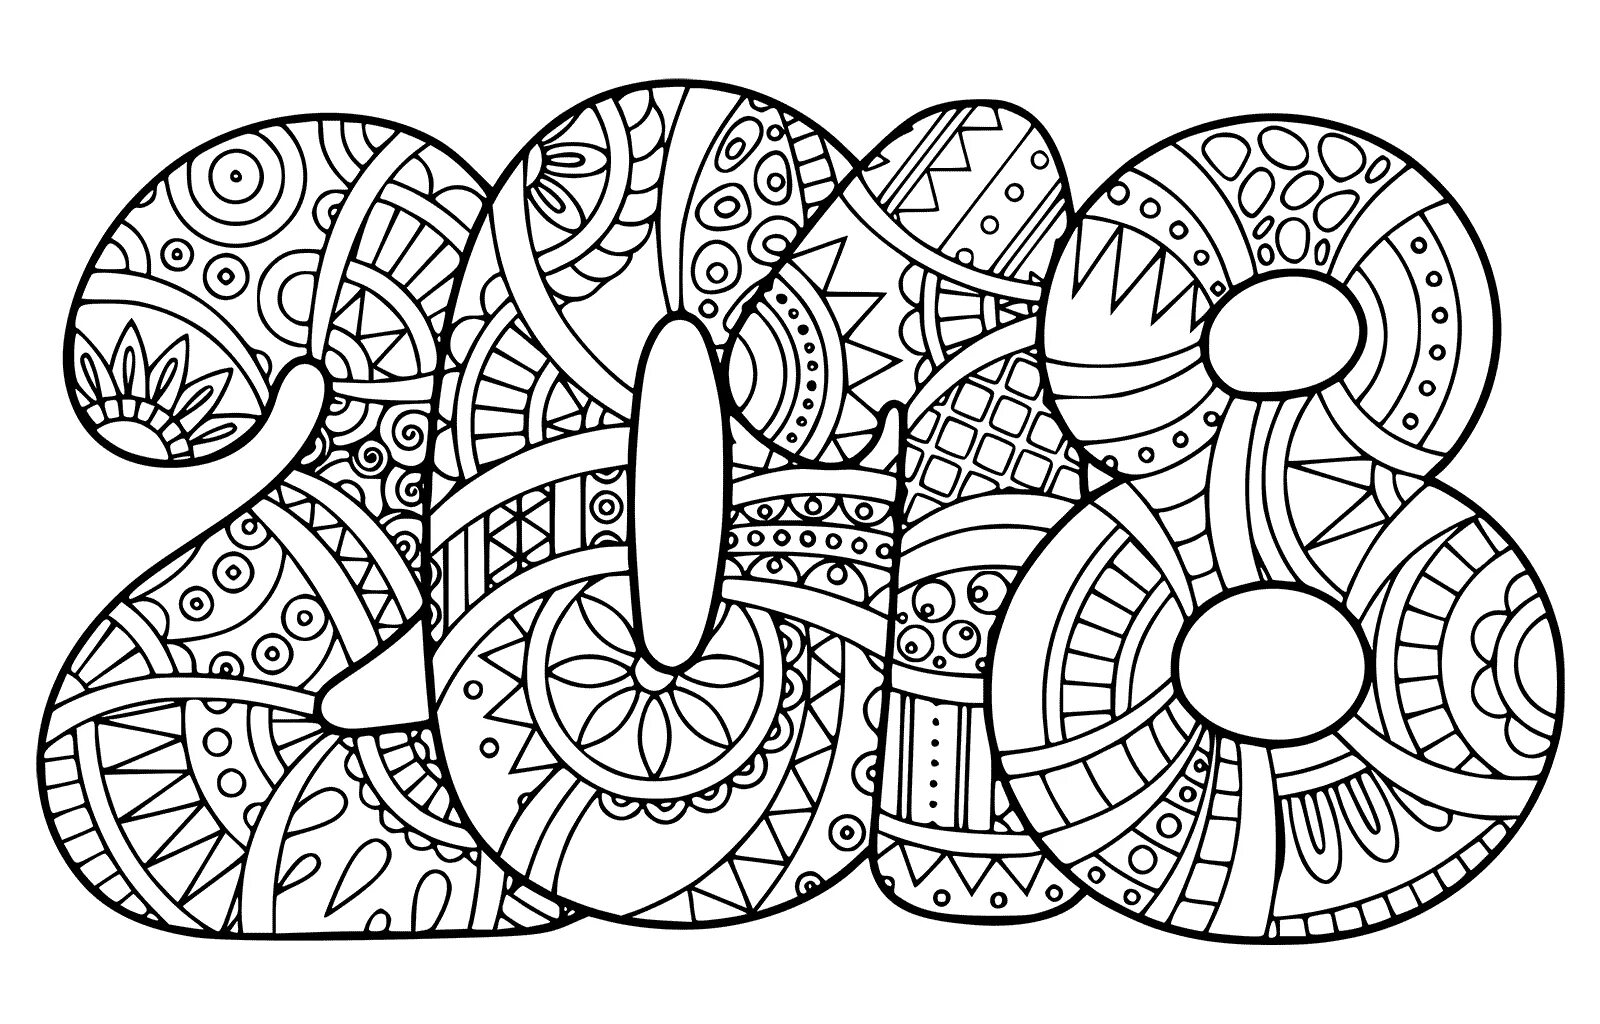 Anti-aging anti-stress coloring book for teenagers